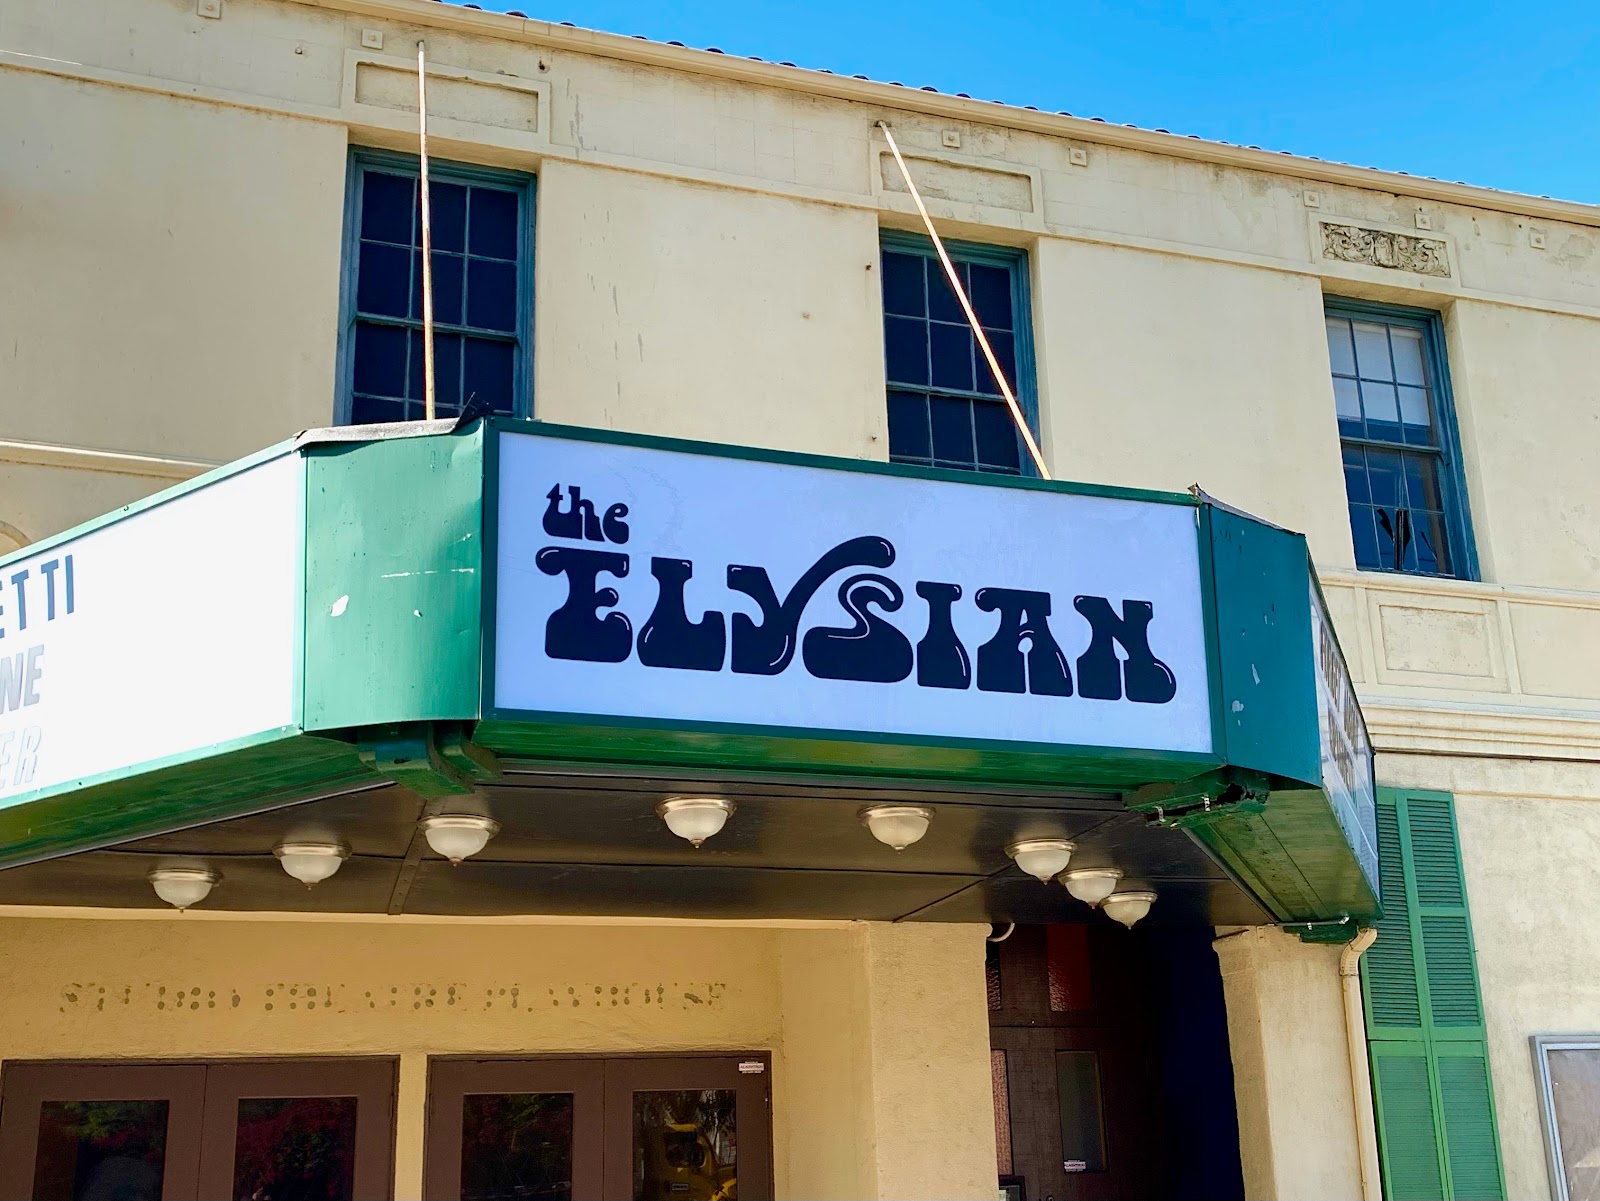 The Elysian Theater